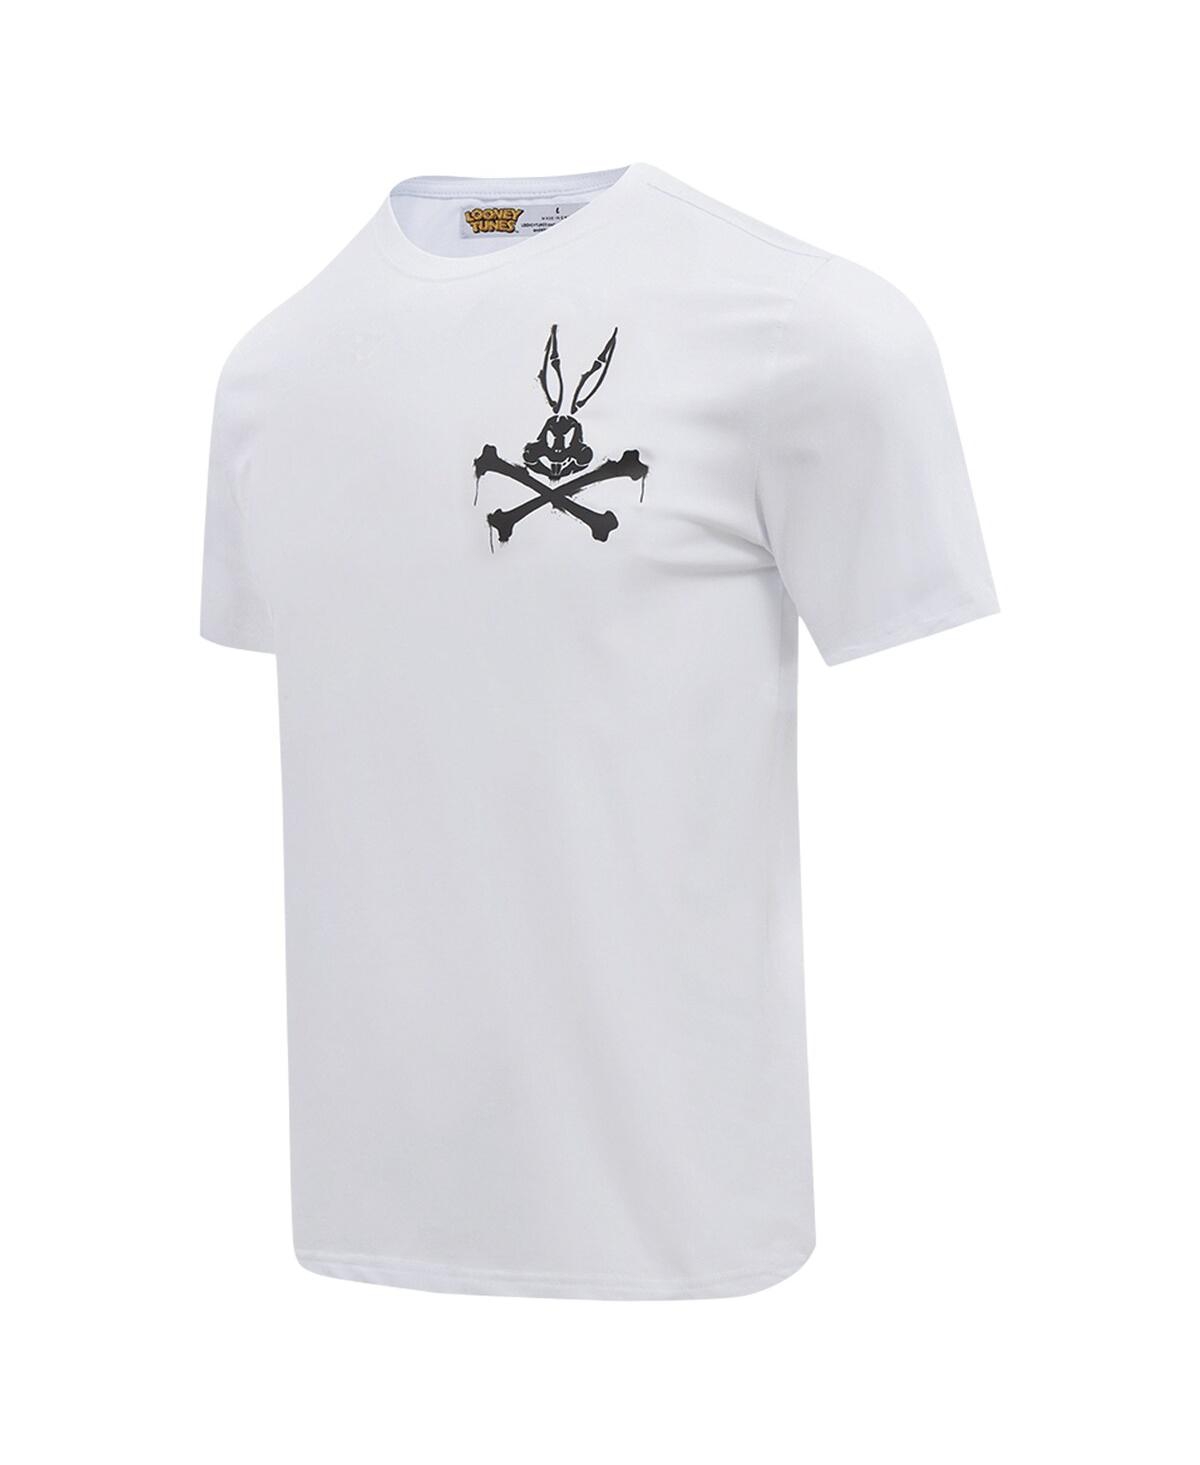 Shop Freeze Max Men's Bugs Bunny White Looney Tunes Melted Skeleton T-shirt